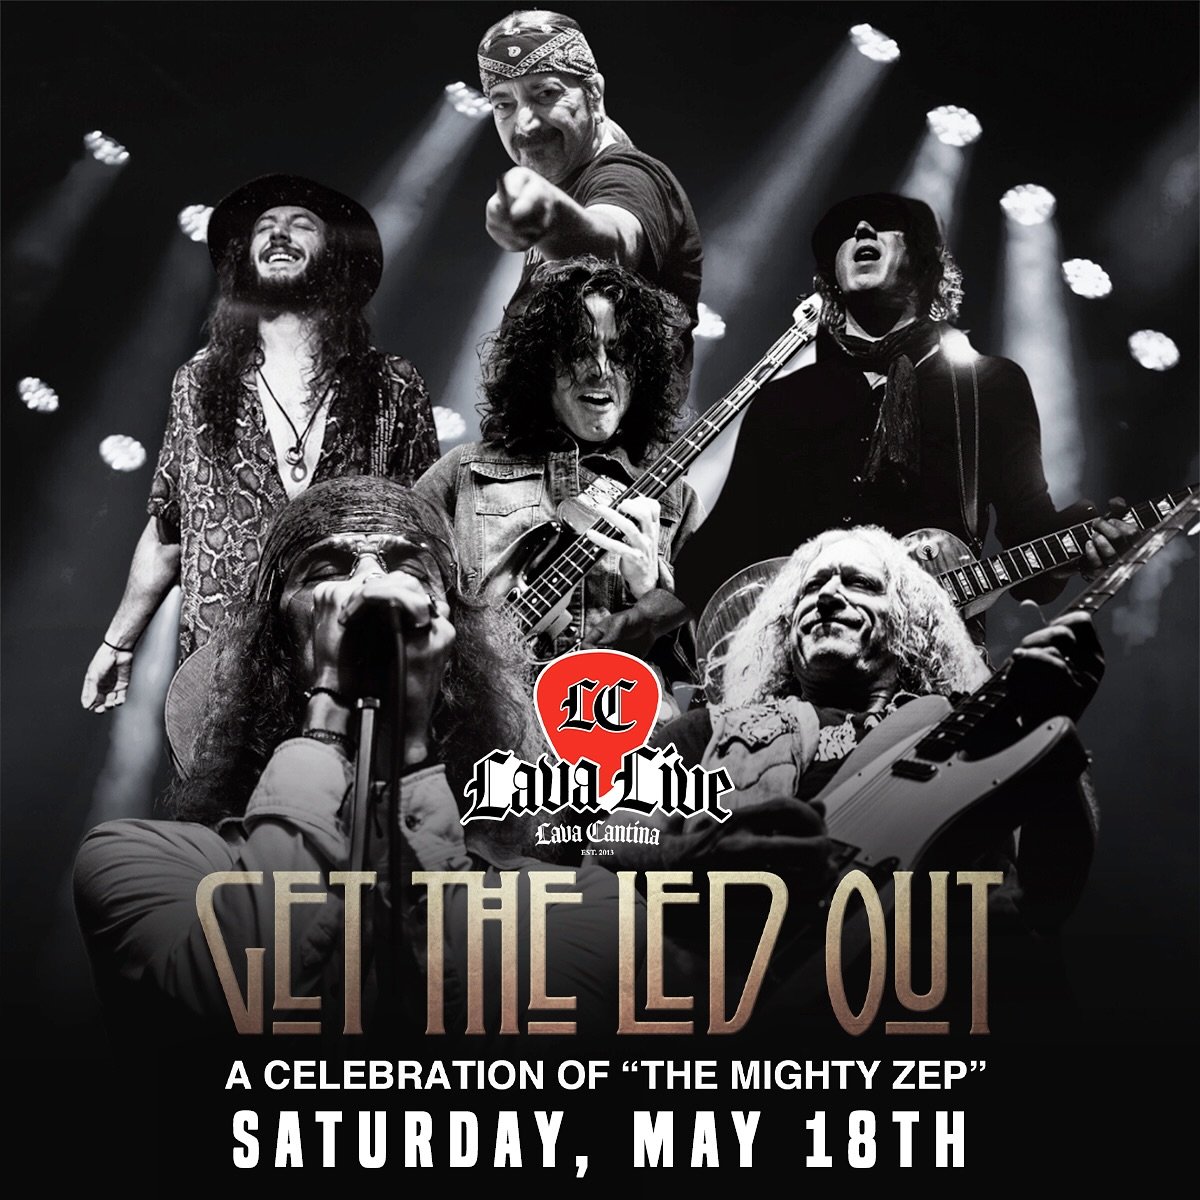 🔥Get The Led Out - A Celebration of &ldquo;The Mighty Zep&rdquo; will be LIVE @lavacantinatc on Saturday, May 18th starting at 8:00 PM!🔥

🎟️🎟️➡️ http://tinyurl.com/3sk4f434

👀General Admission for this show is CHARGED. Reserved seating on our VI